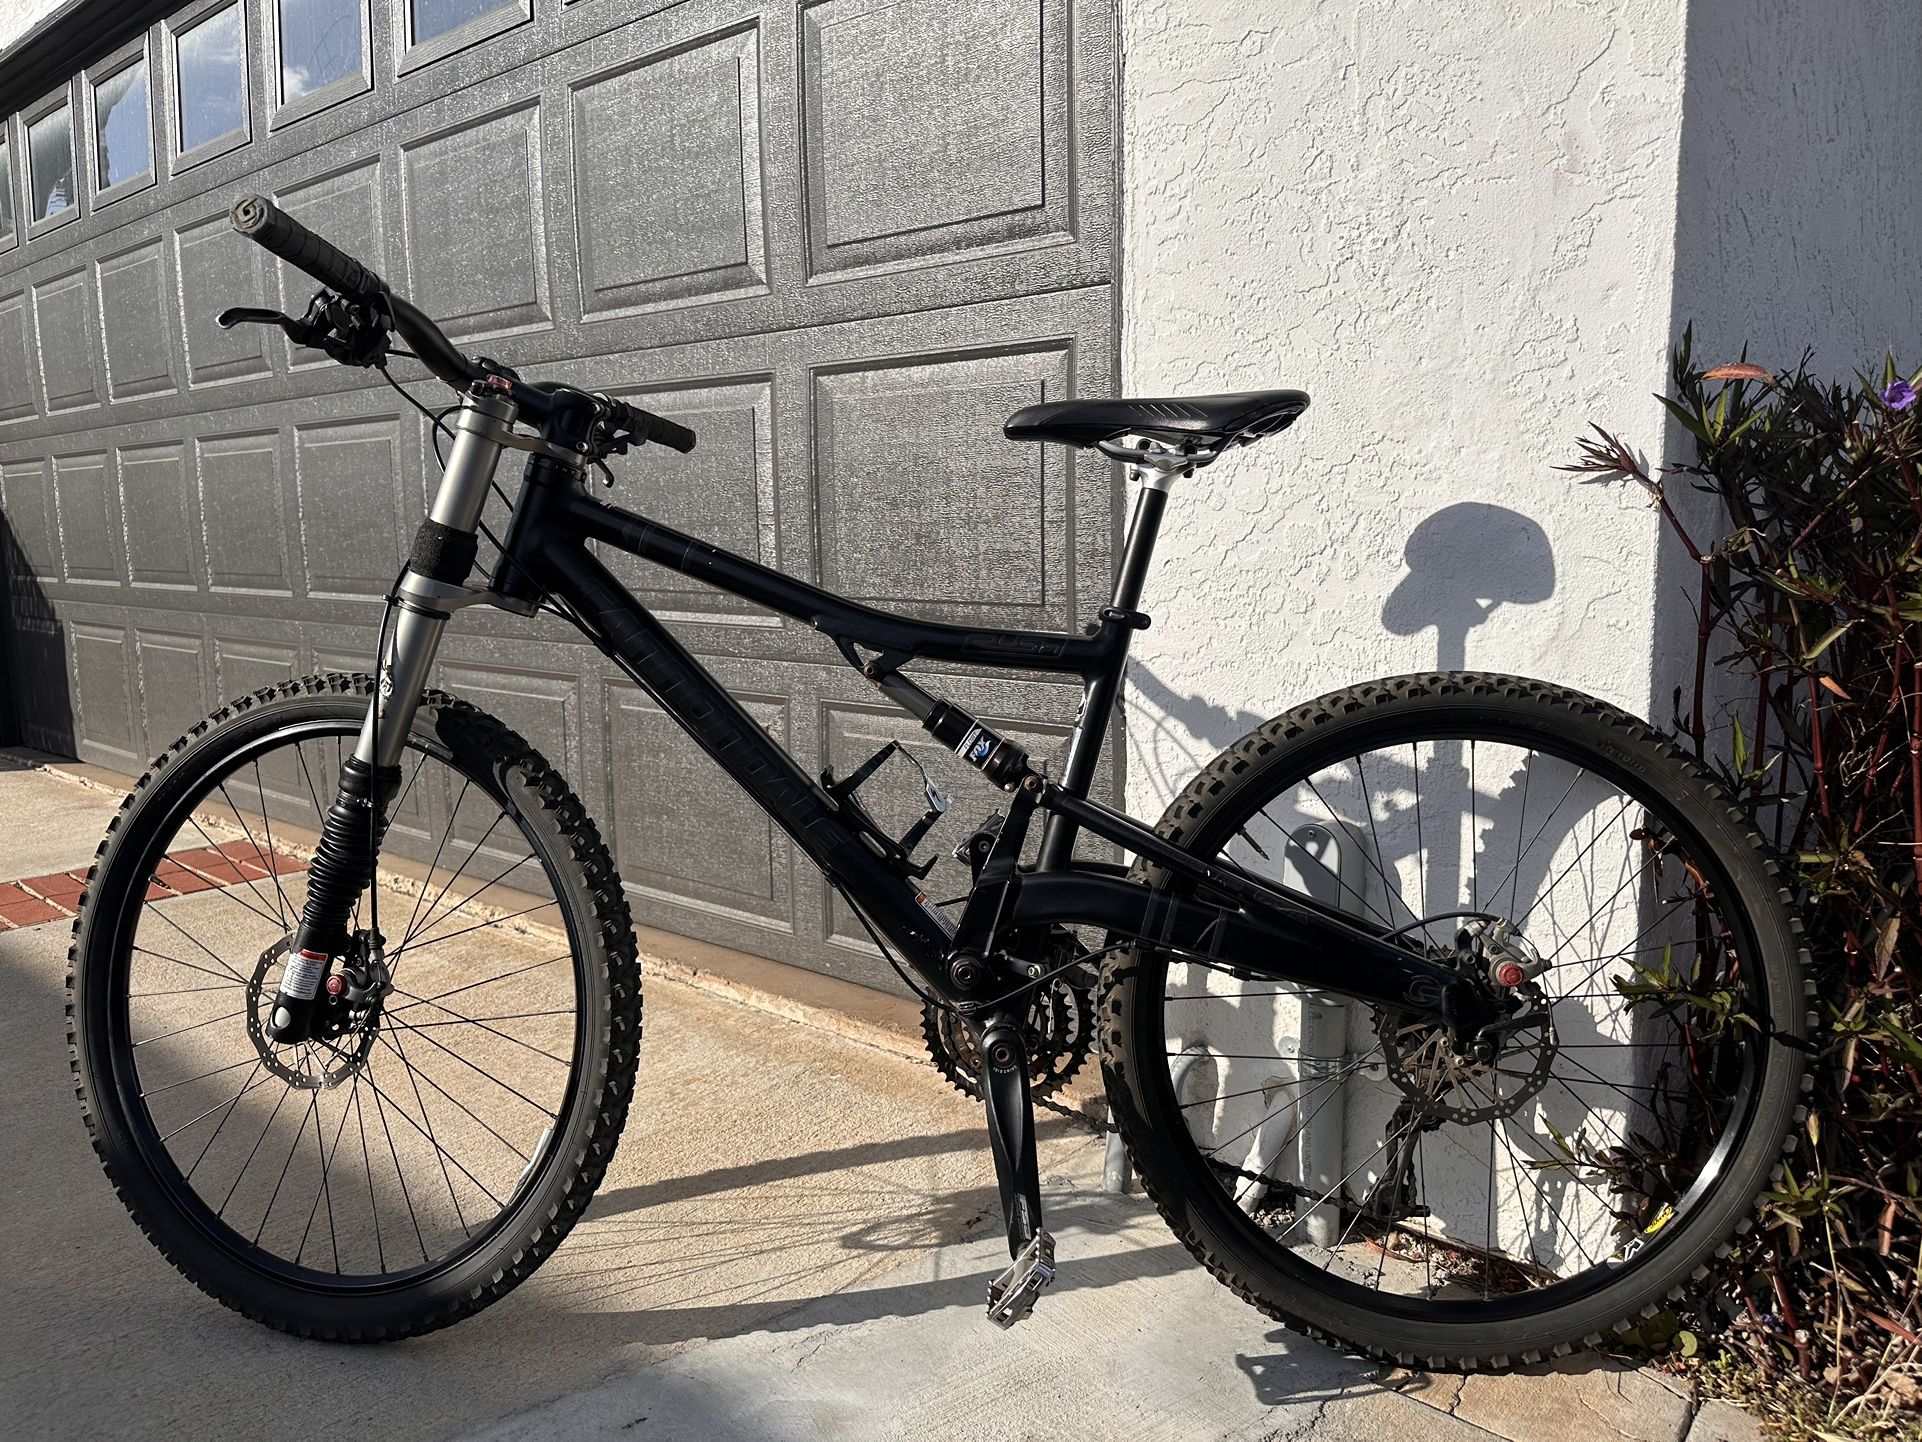 CANNONDALE  LEFTY RUSH 26 MEDIUM MOUNTAIN BIKE. FULL SUSPENSION WITH LOCKOUT